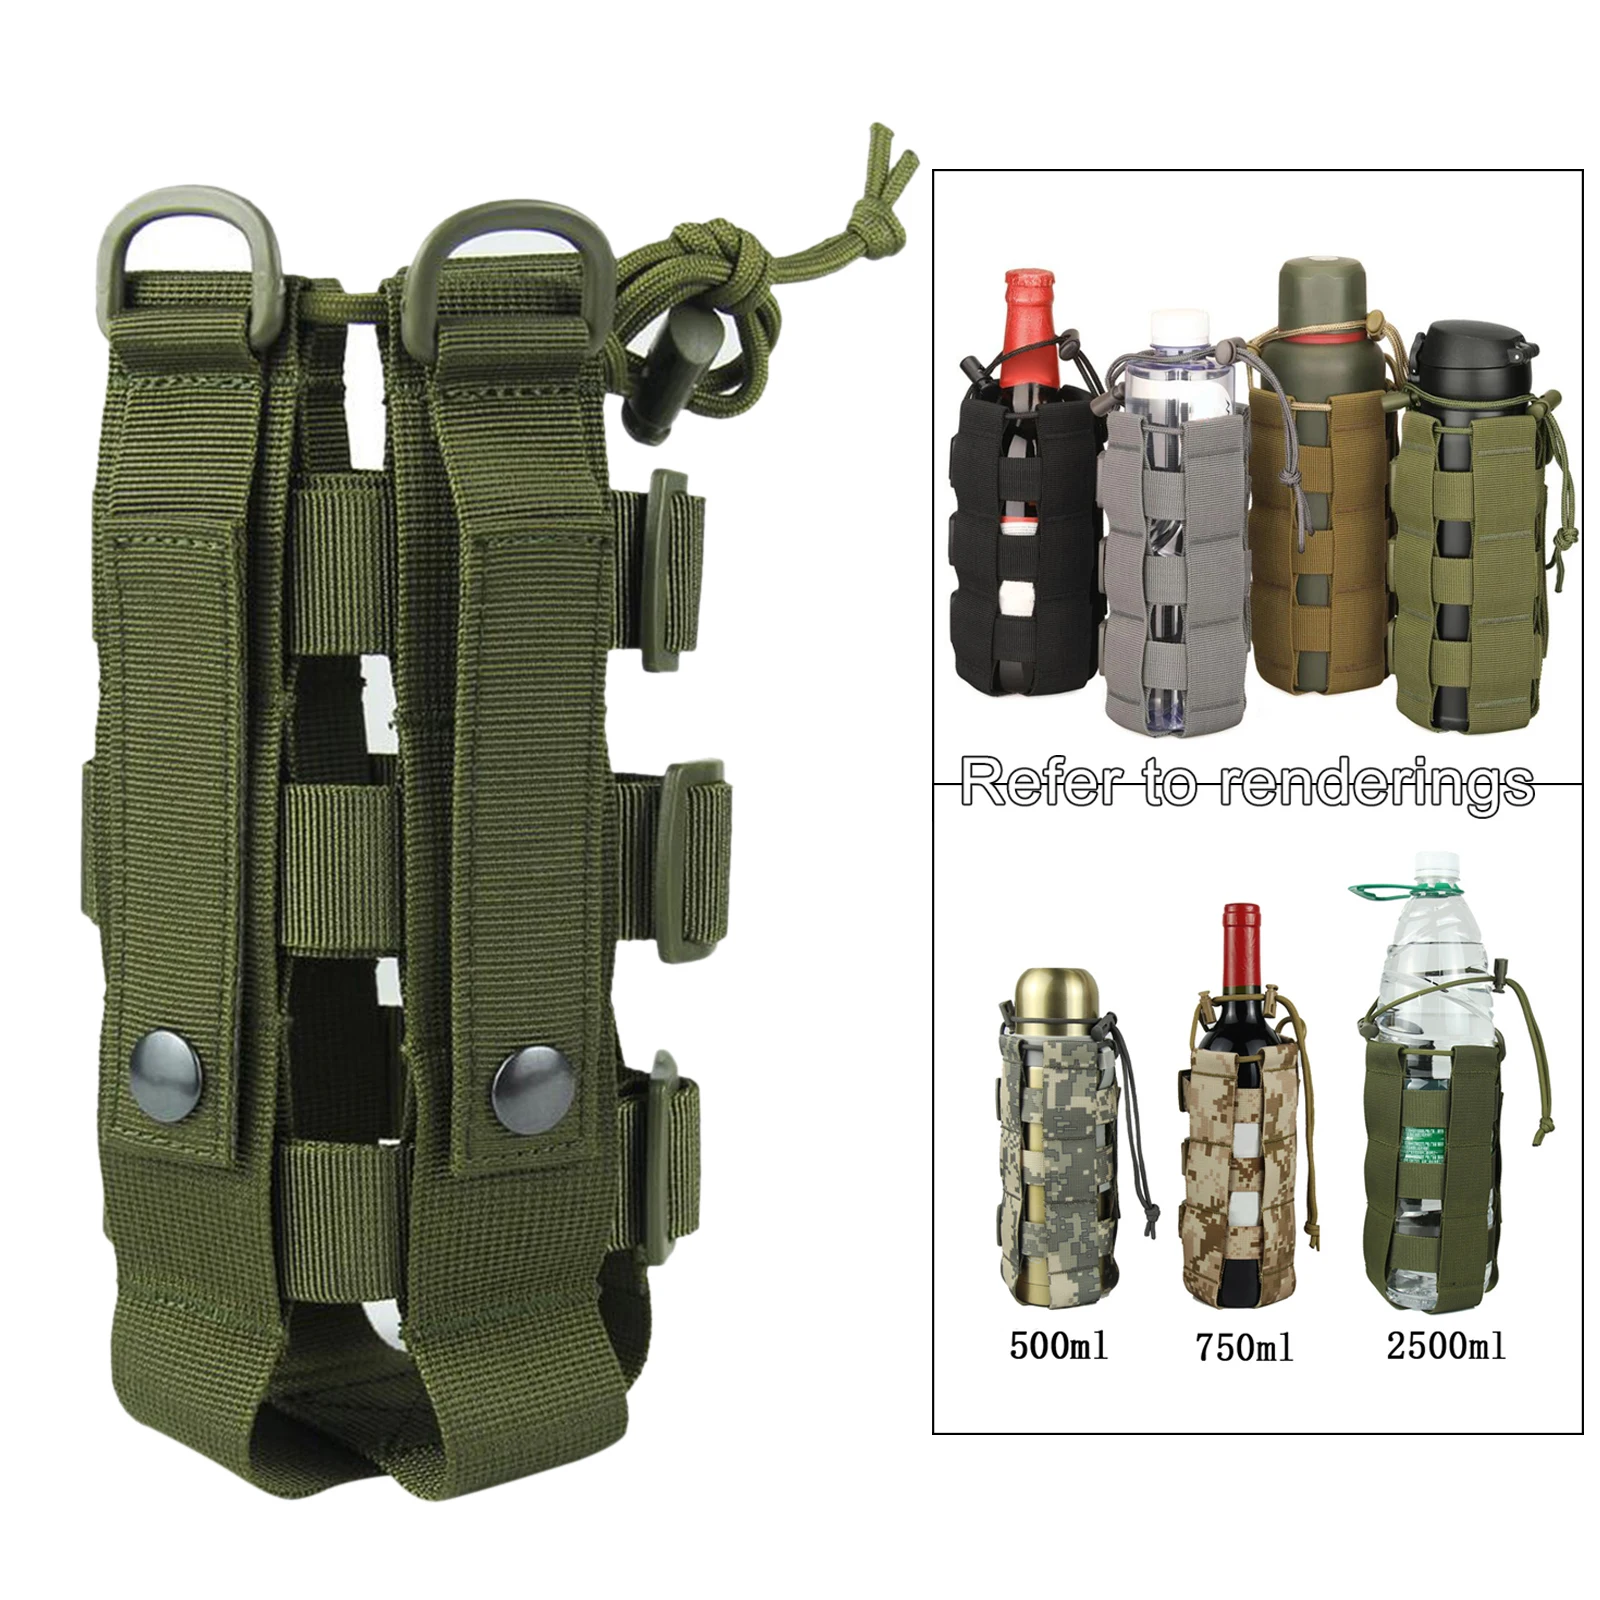 0.3L-0.8L Tactical Molle Water Bottle Pouch Military Canteen Cover Holster Outdoor Travel Kettle Bag for Hiking Camping Outdoor